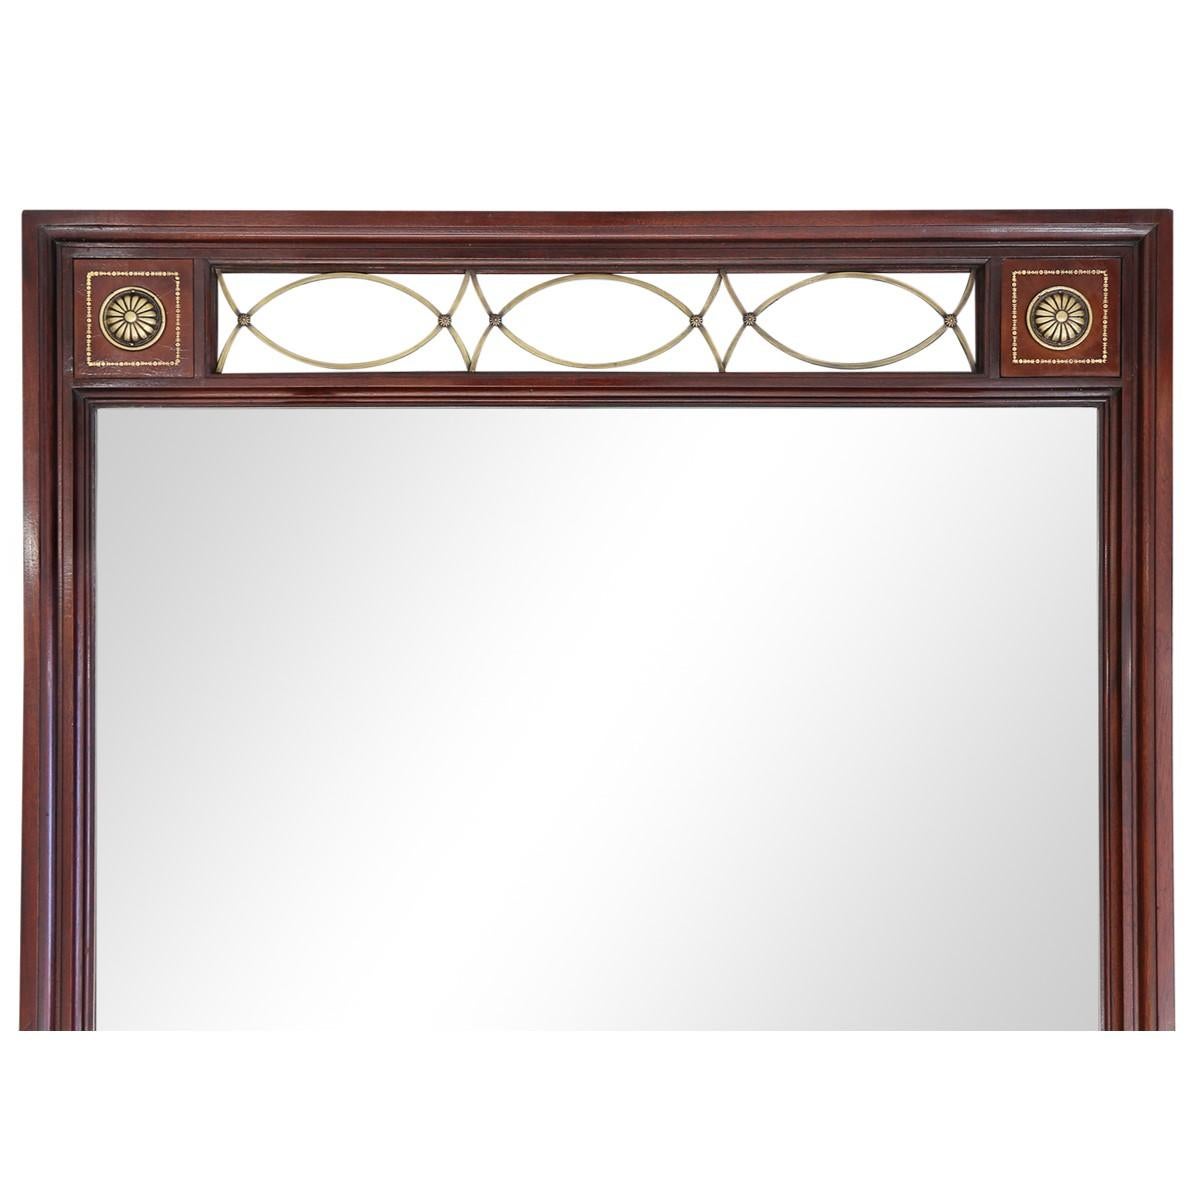 Empire Revival Large Empire Mahogany Mirror with Brass and Leather Accents